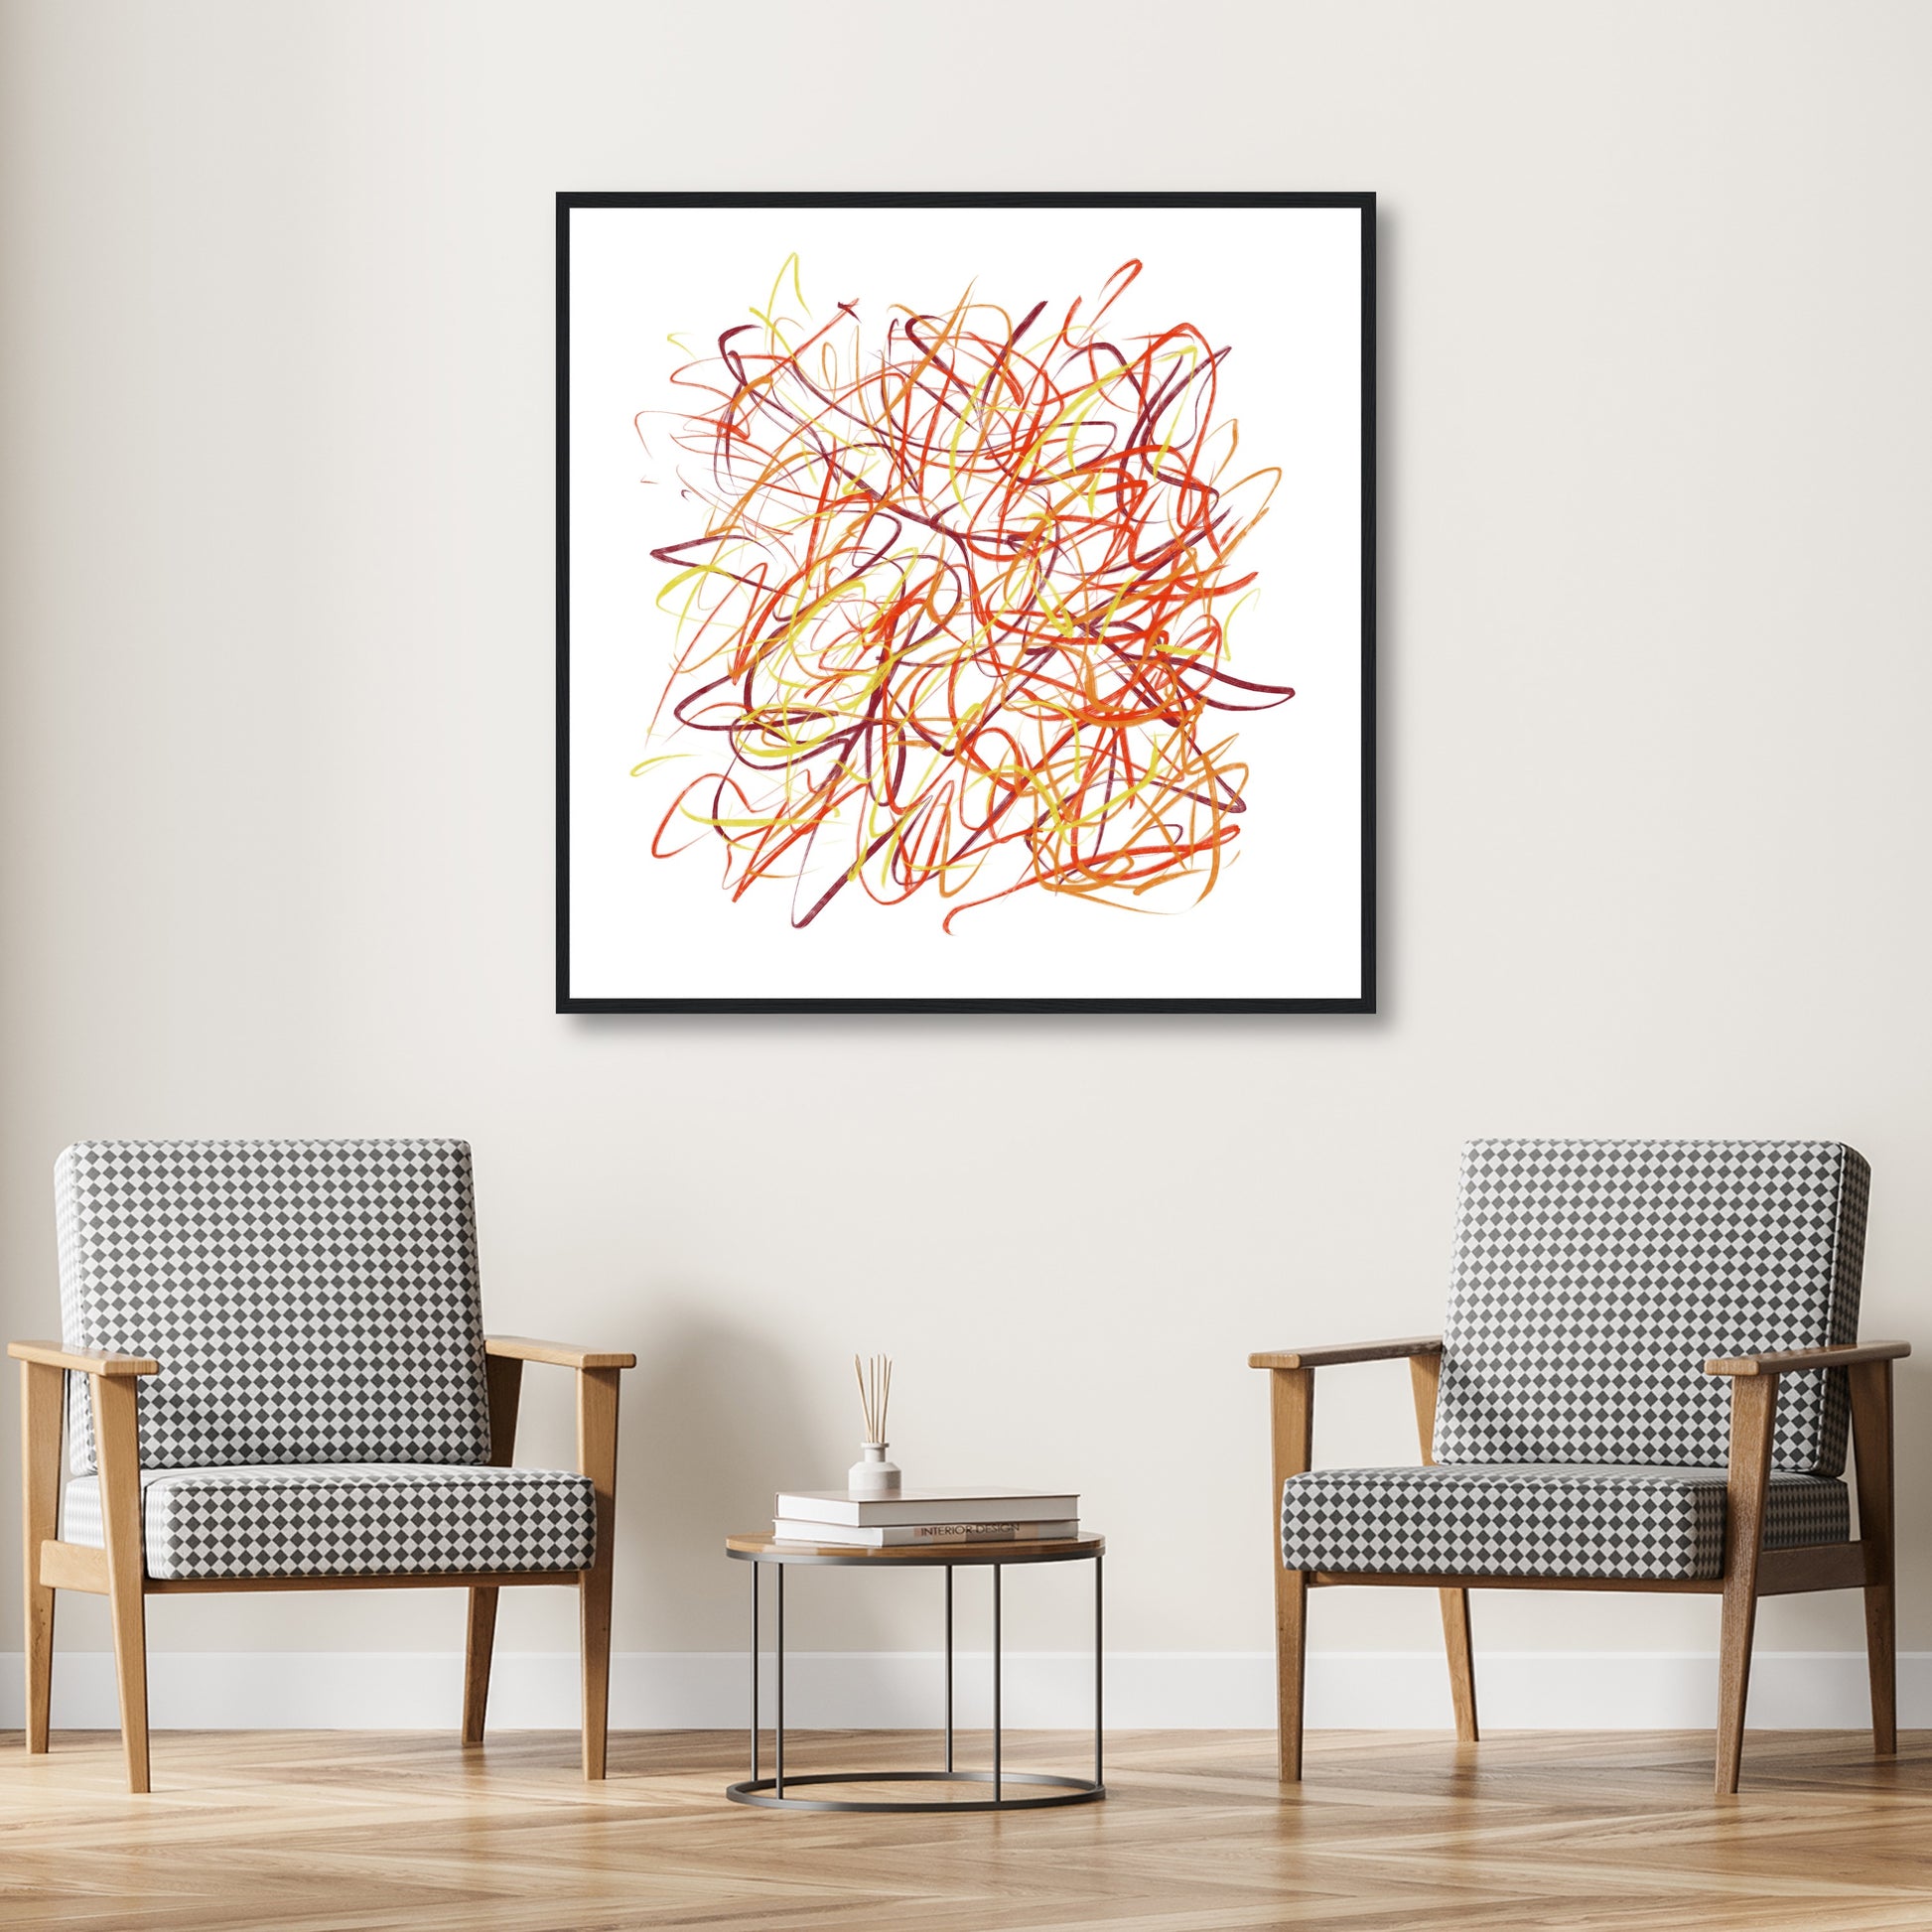 Framed in black, fiery reds and yellows stand out against a white wall with back and white twin chairs below.